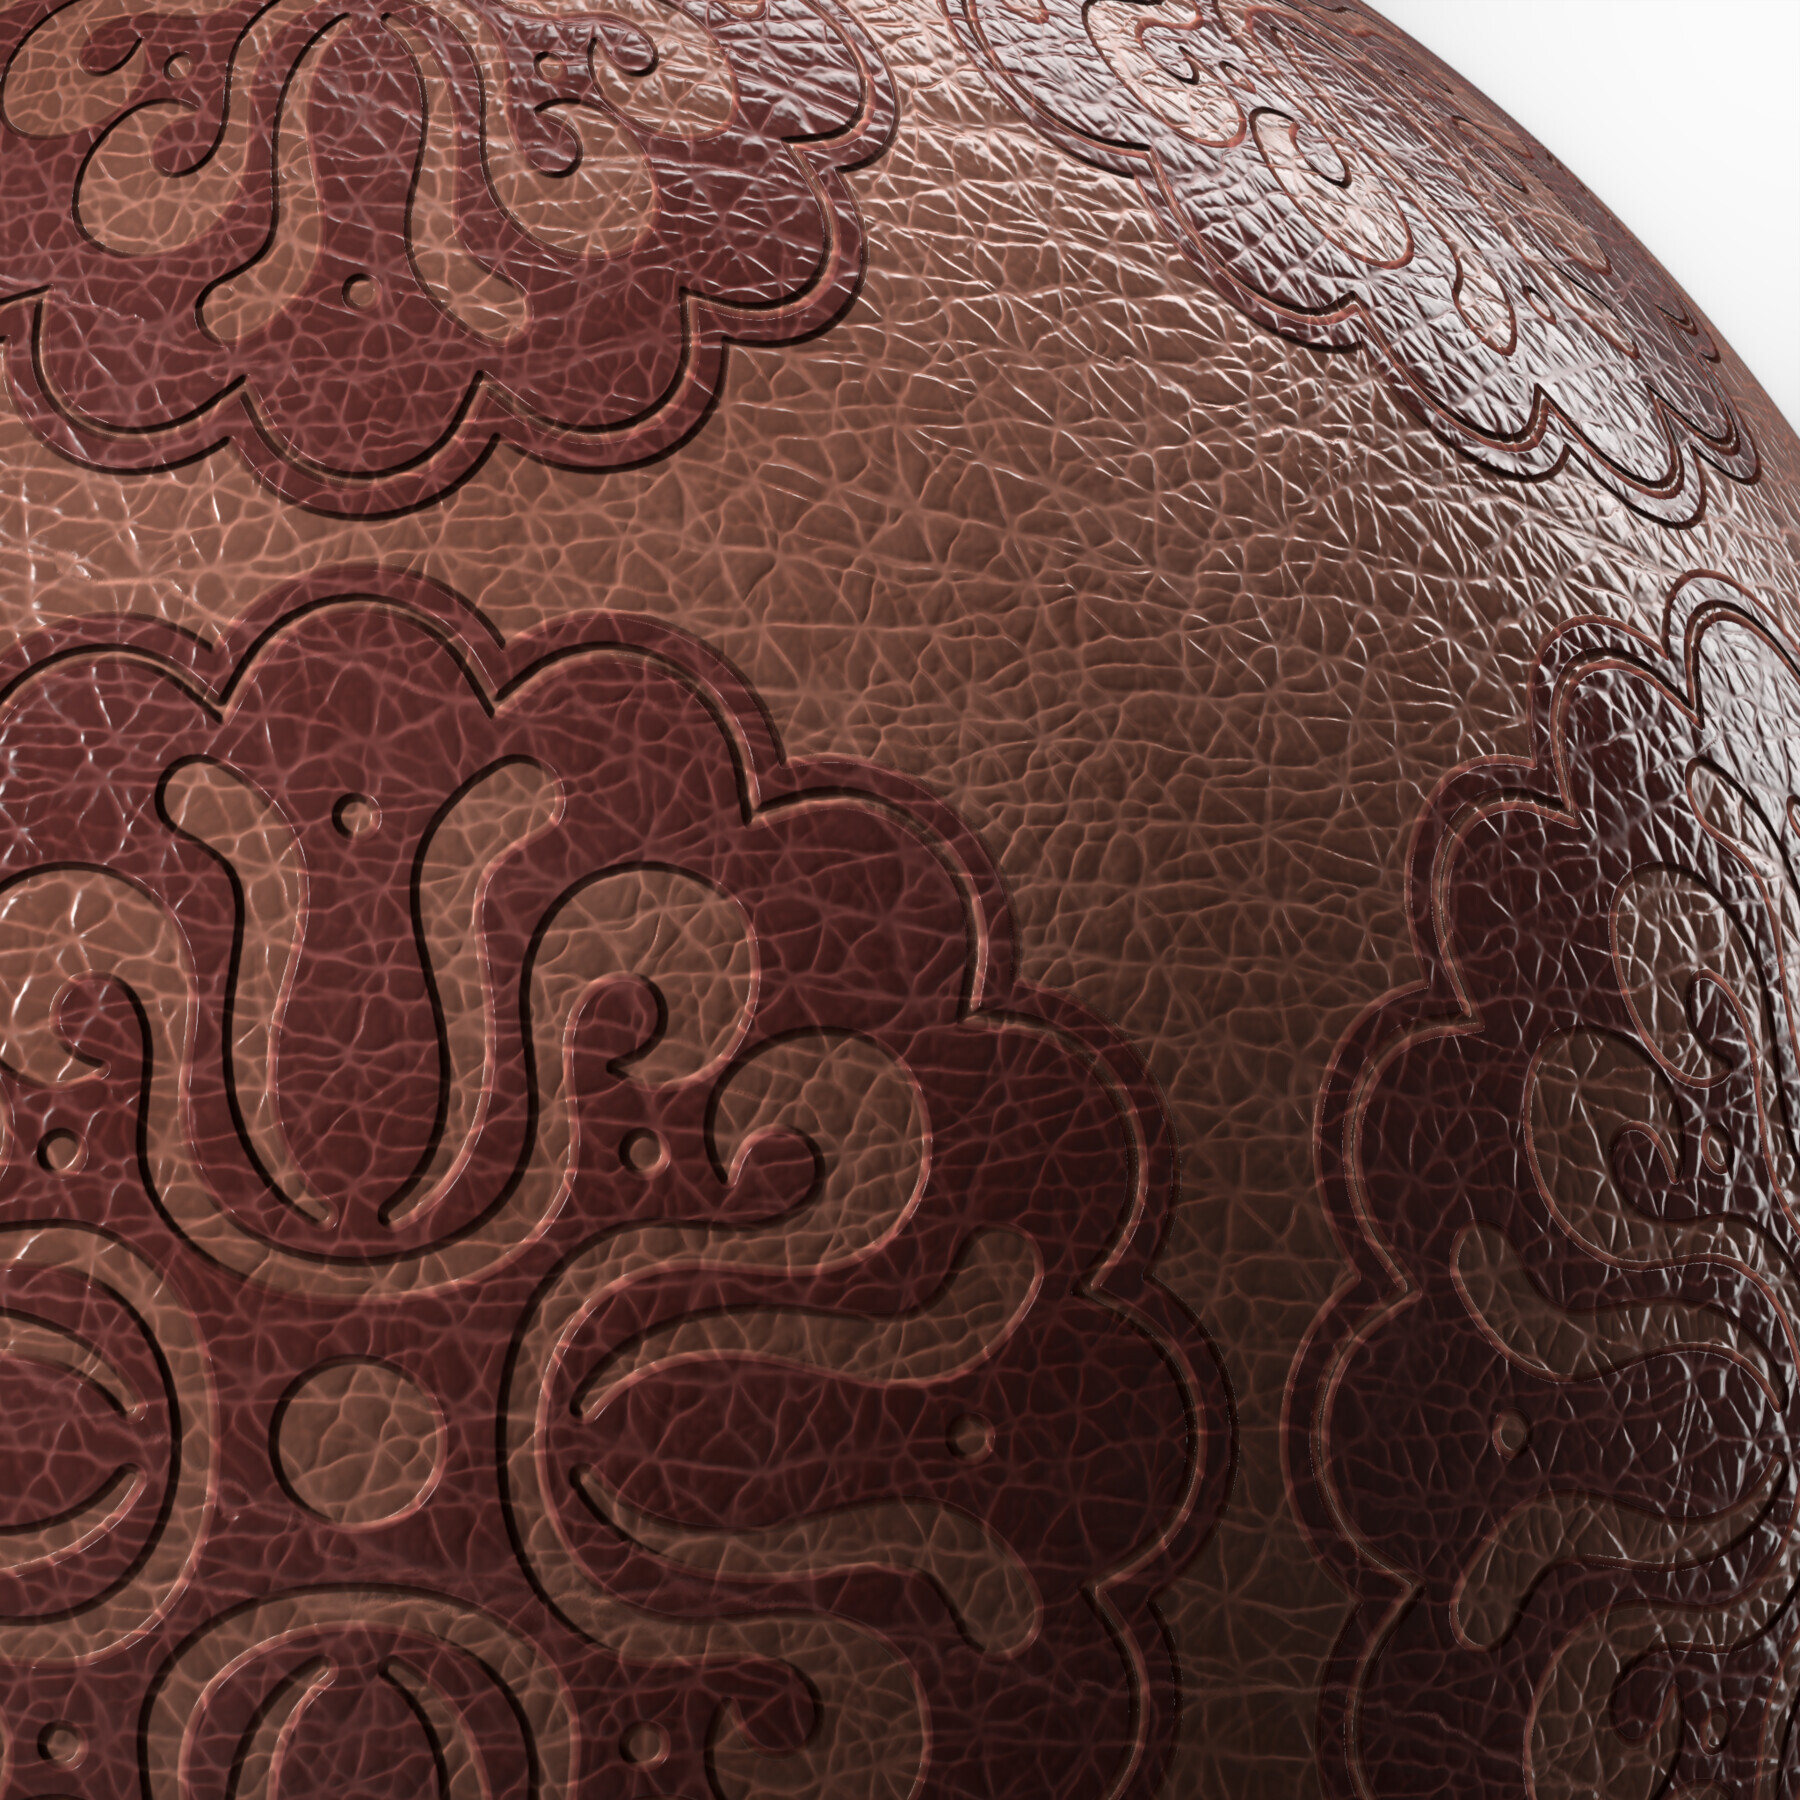 Leather Materials 20- Leather Ornament Pattern By Sbsar-Pbr 4k Seamless 3d  model Buy Download 3dbrute